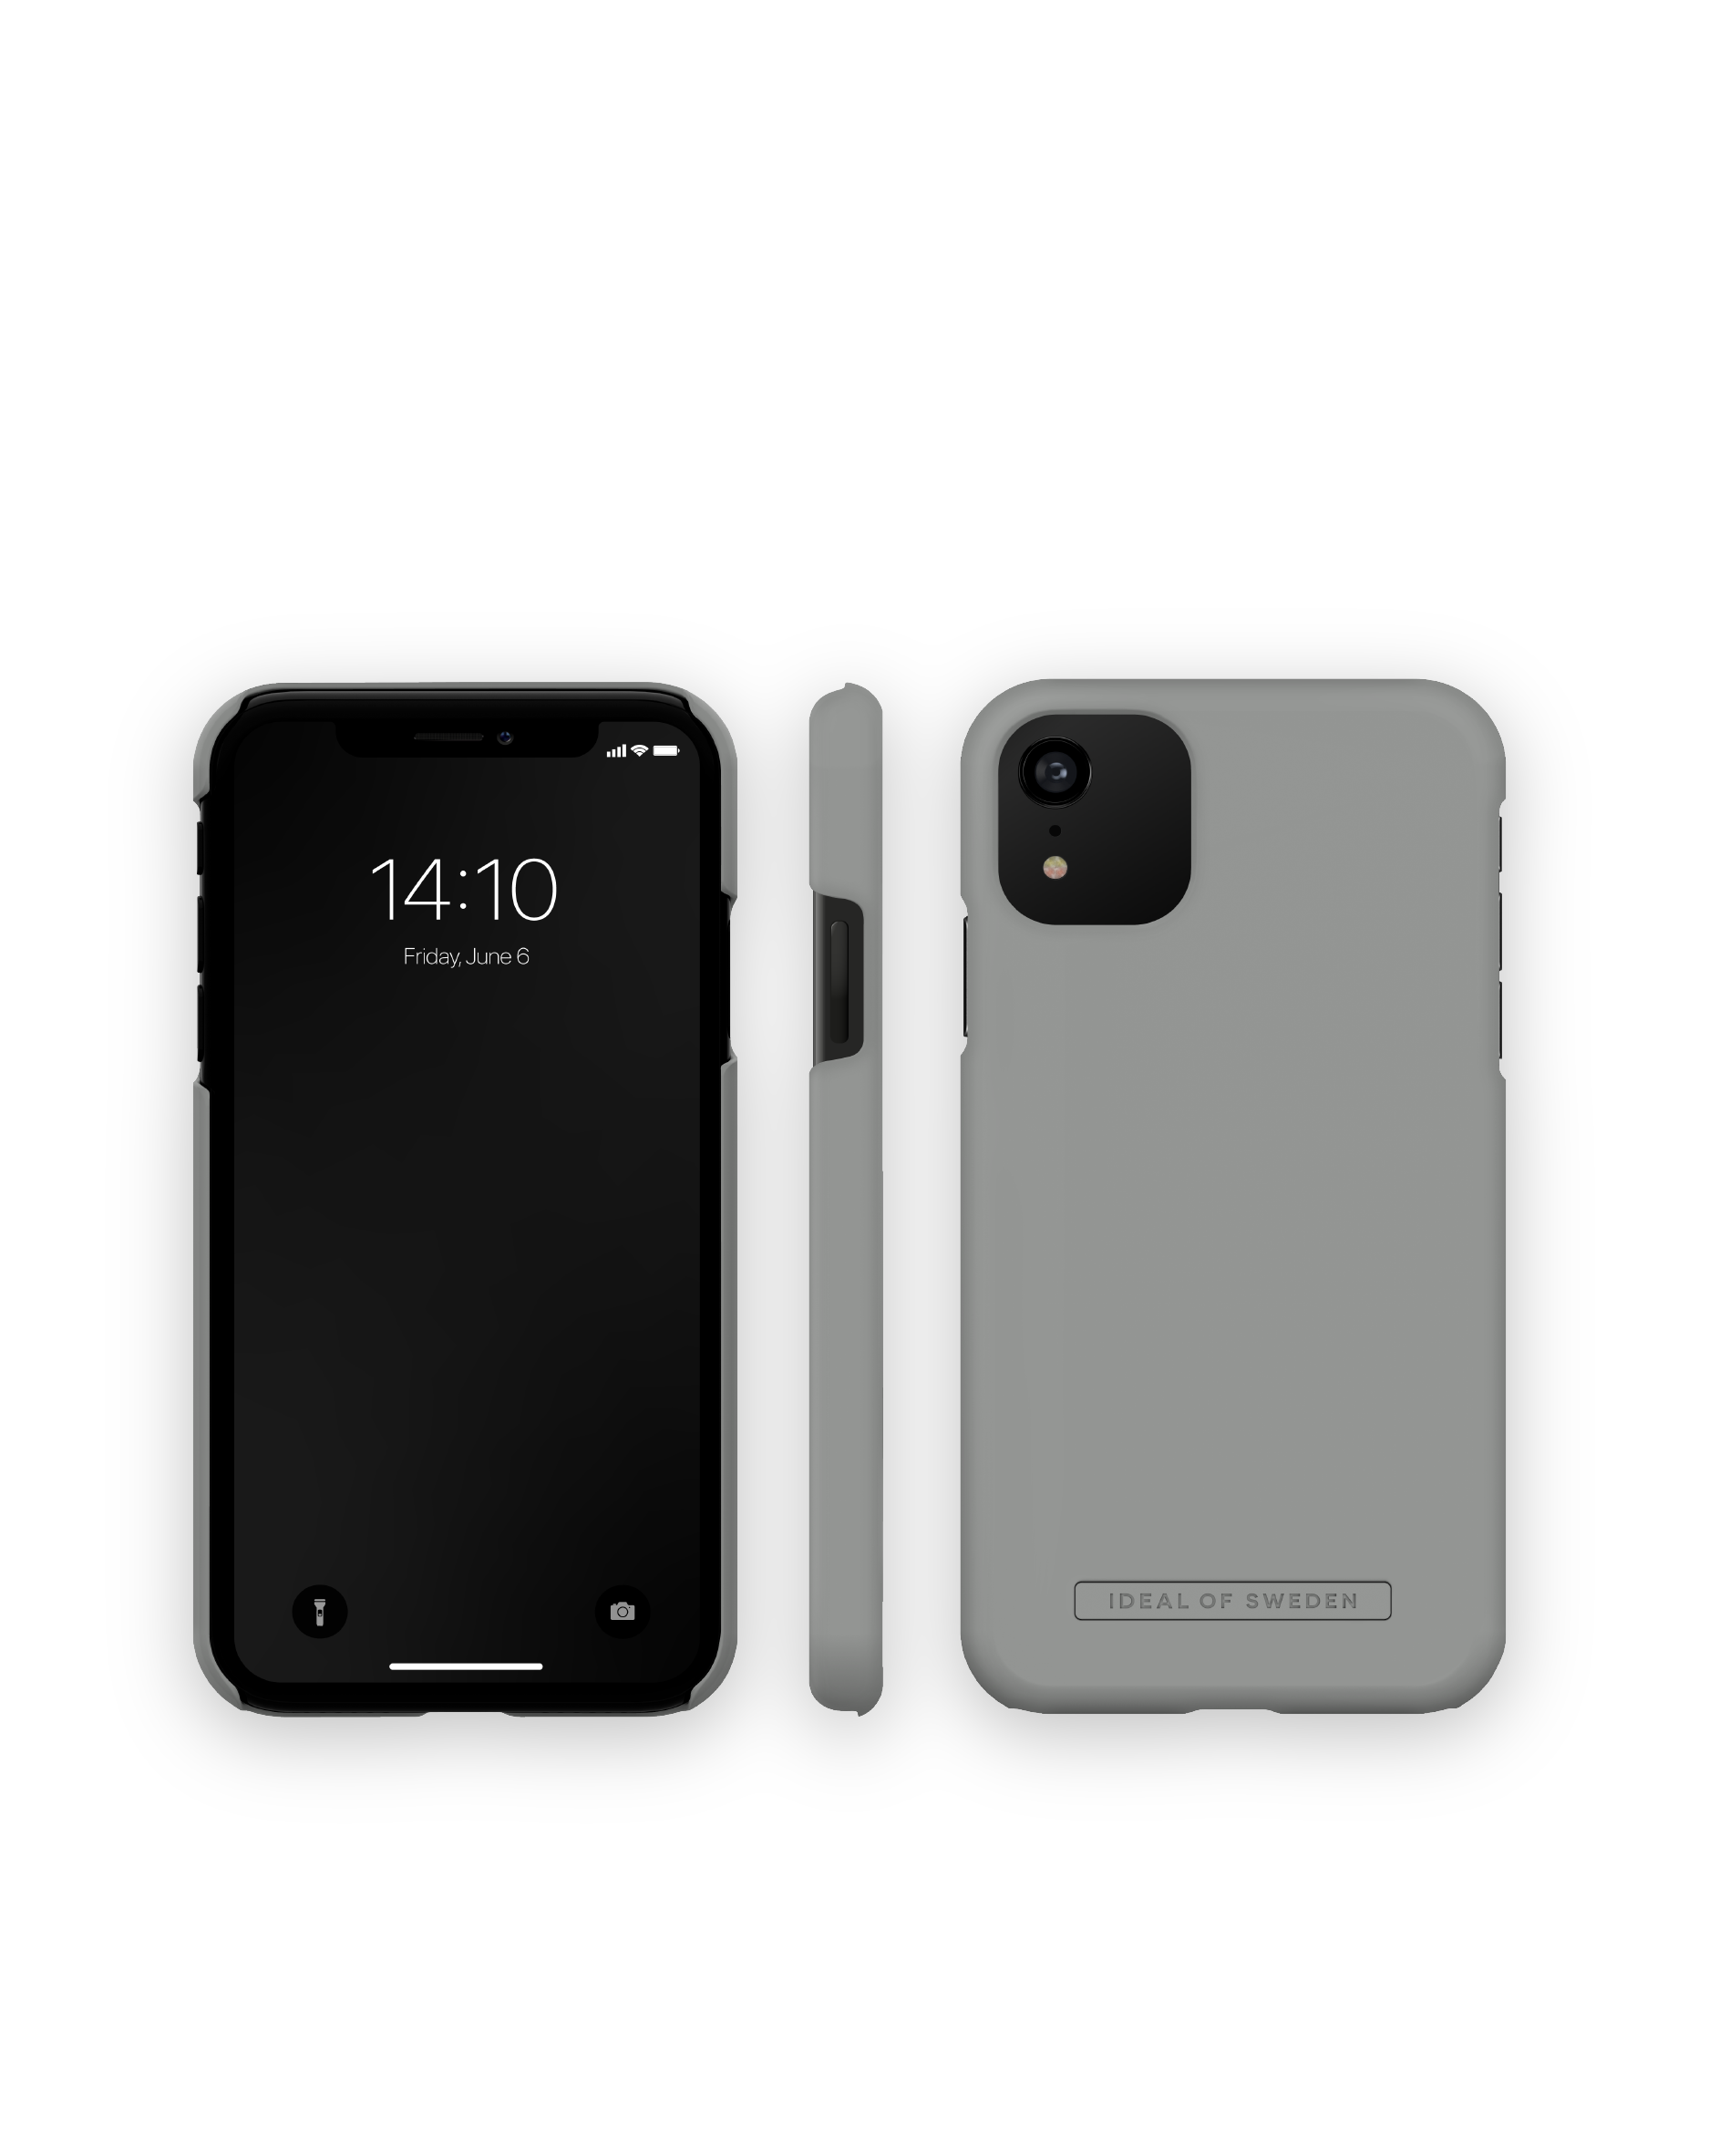 XR, Backcover, / Grey Apple, 11 Ash OF IDFCSS22-I1961-409, IDEAL iPhone iPhone SWEDEN